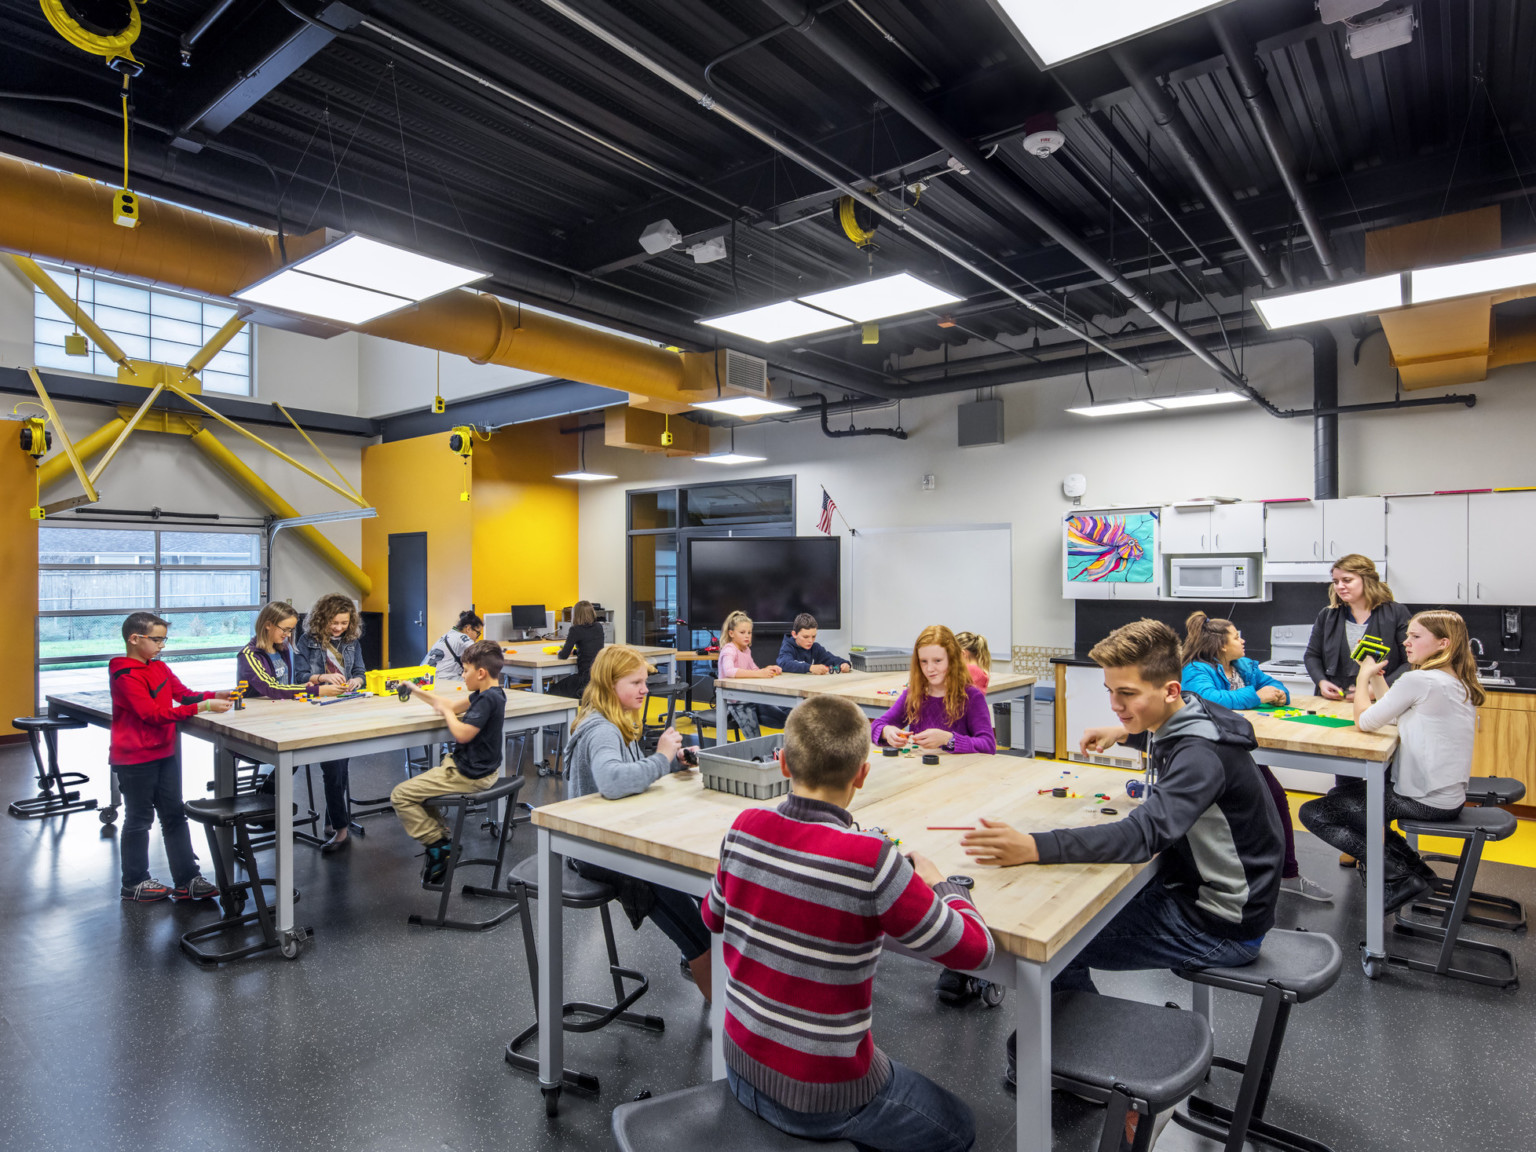 Wood topped tables with flexible seating in white classroom with yellow accents. The black ceiling has exposed pipes and duct